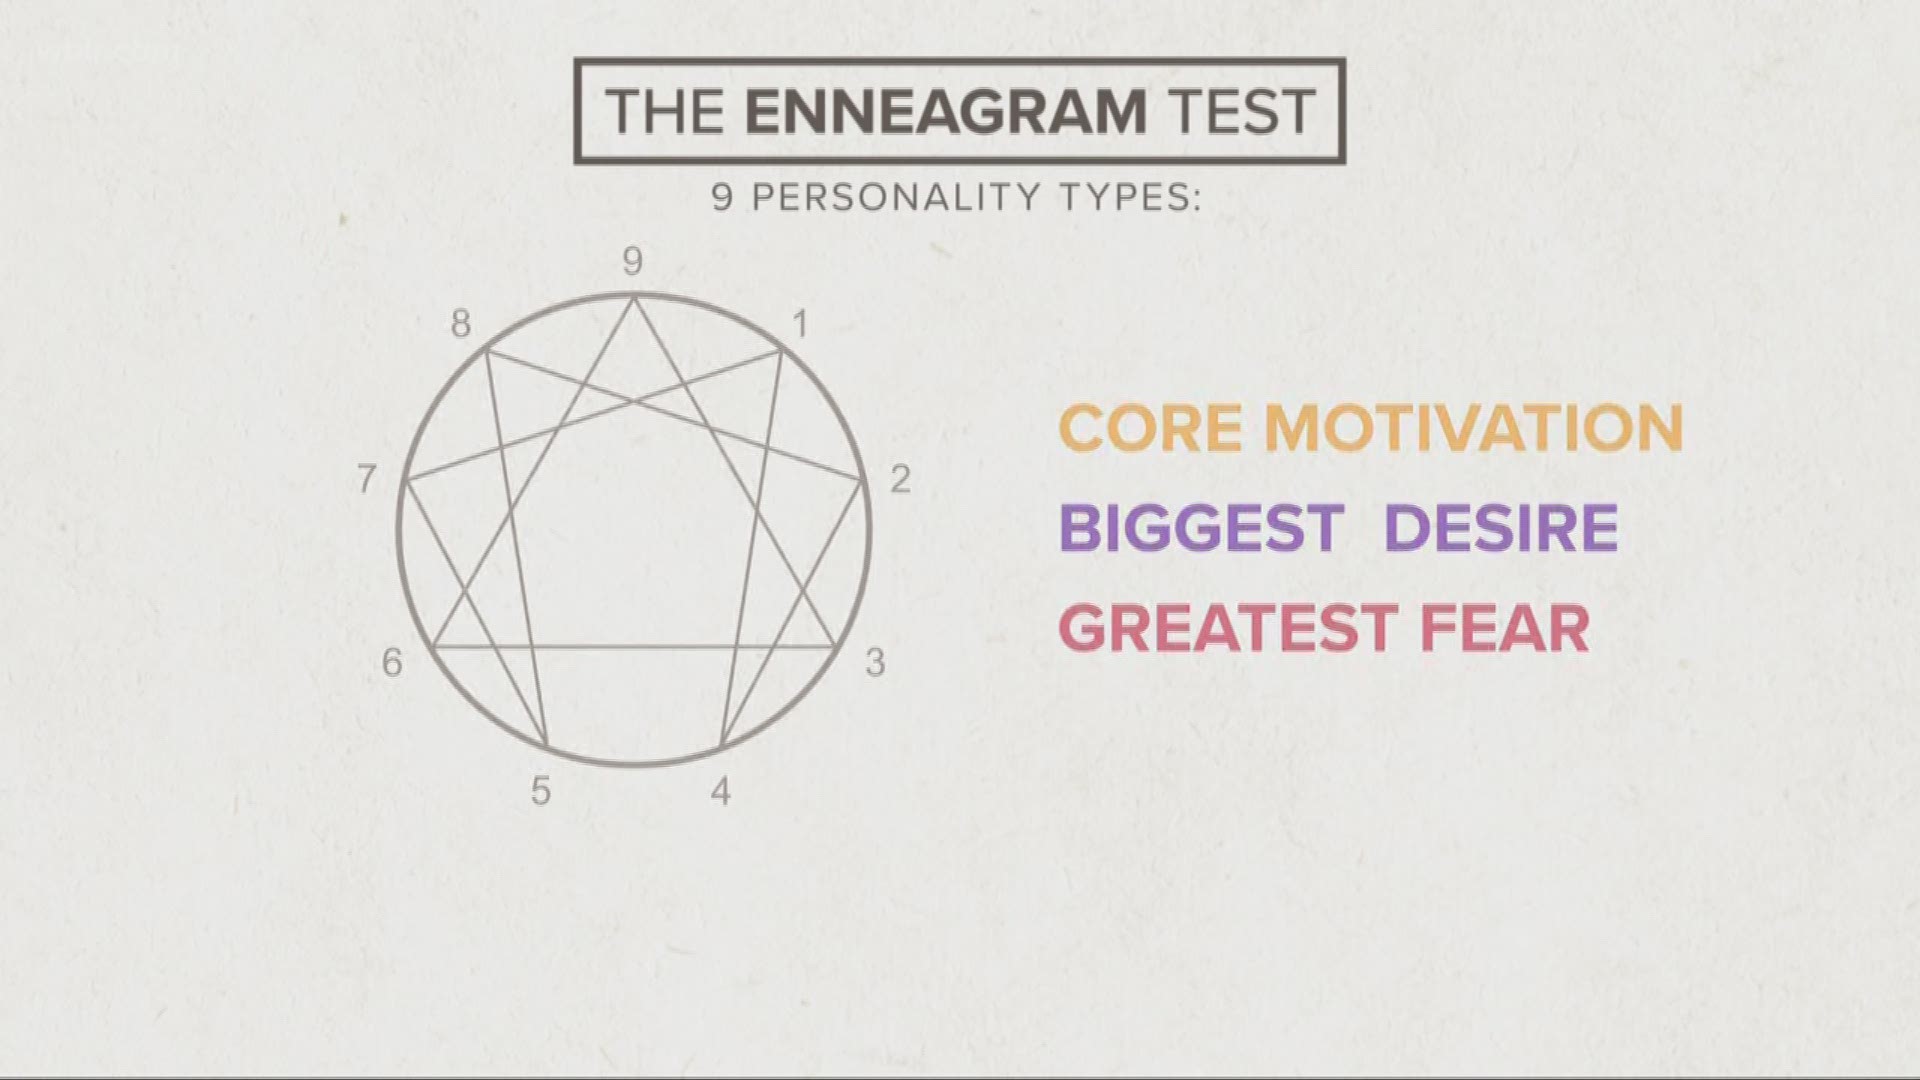 Today -- we're breaking down one test that you've probably seen people talk about on social media. It's called the Enneagram.